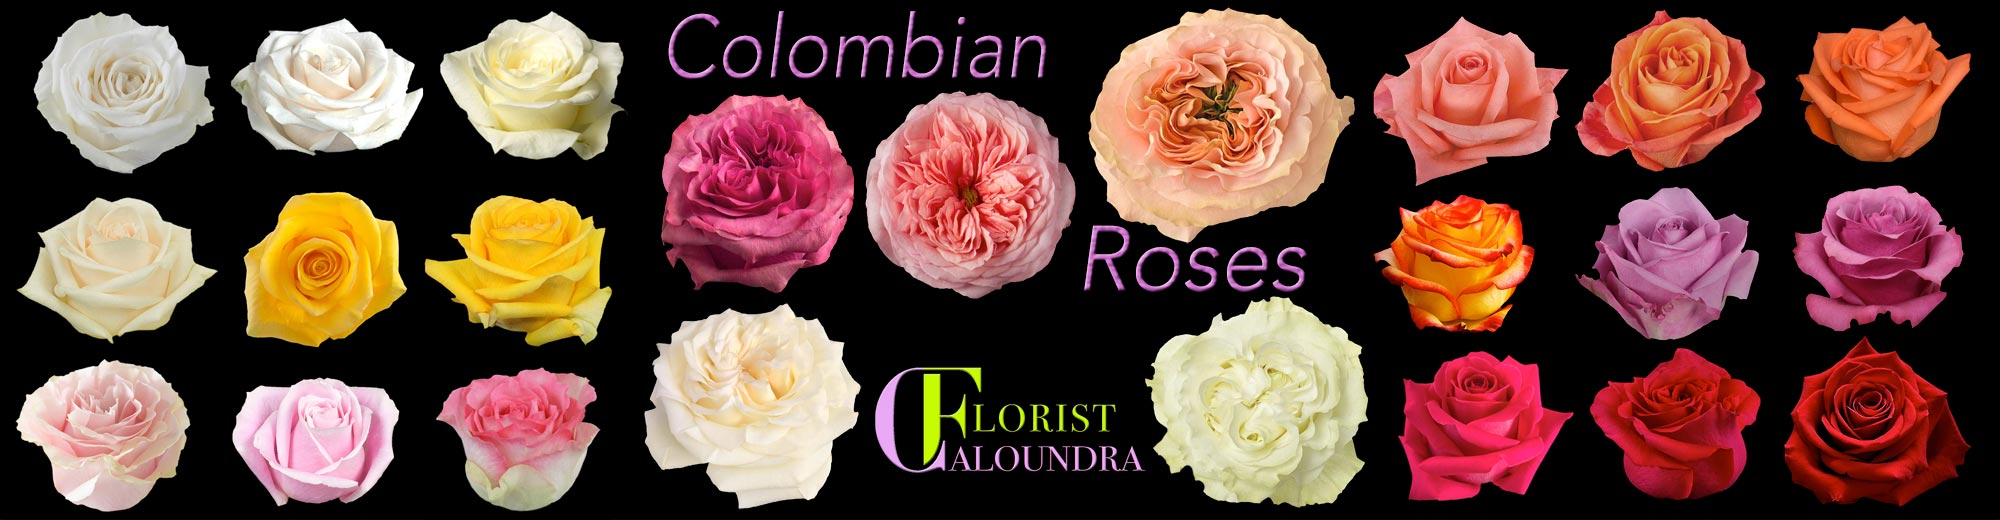 COLOMBIAN ROSES